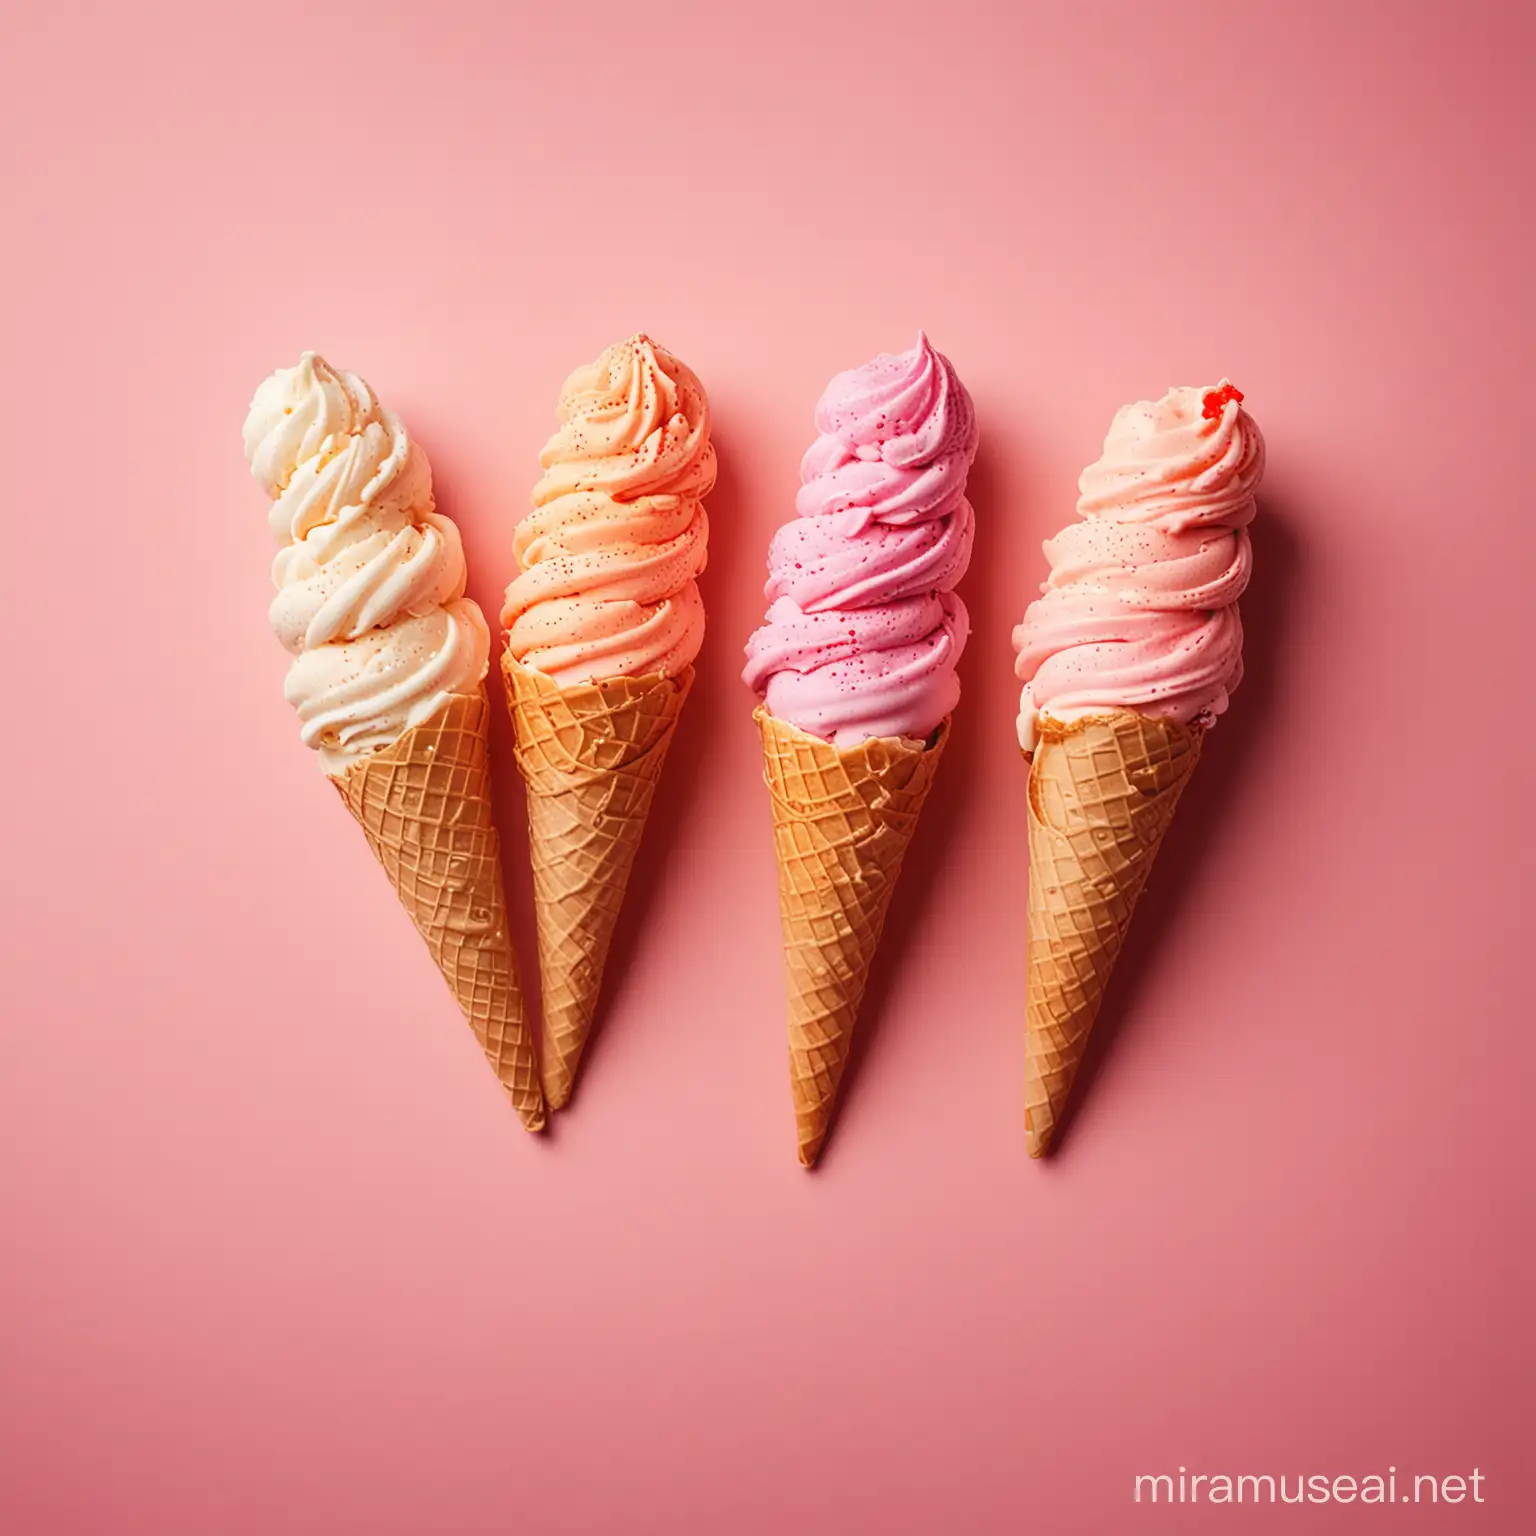 Colorful Twisted Ice Cream Cones with Splashes on Light Red Background